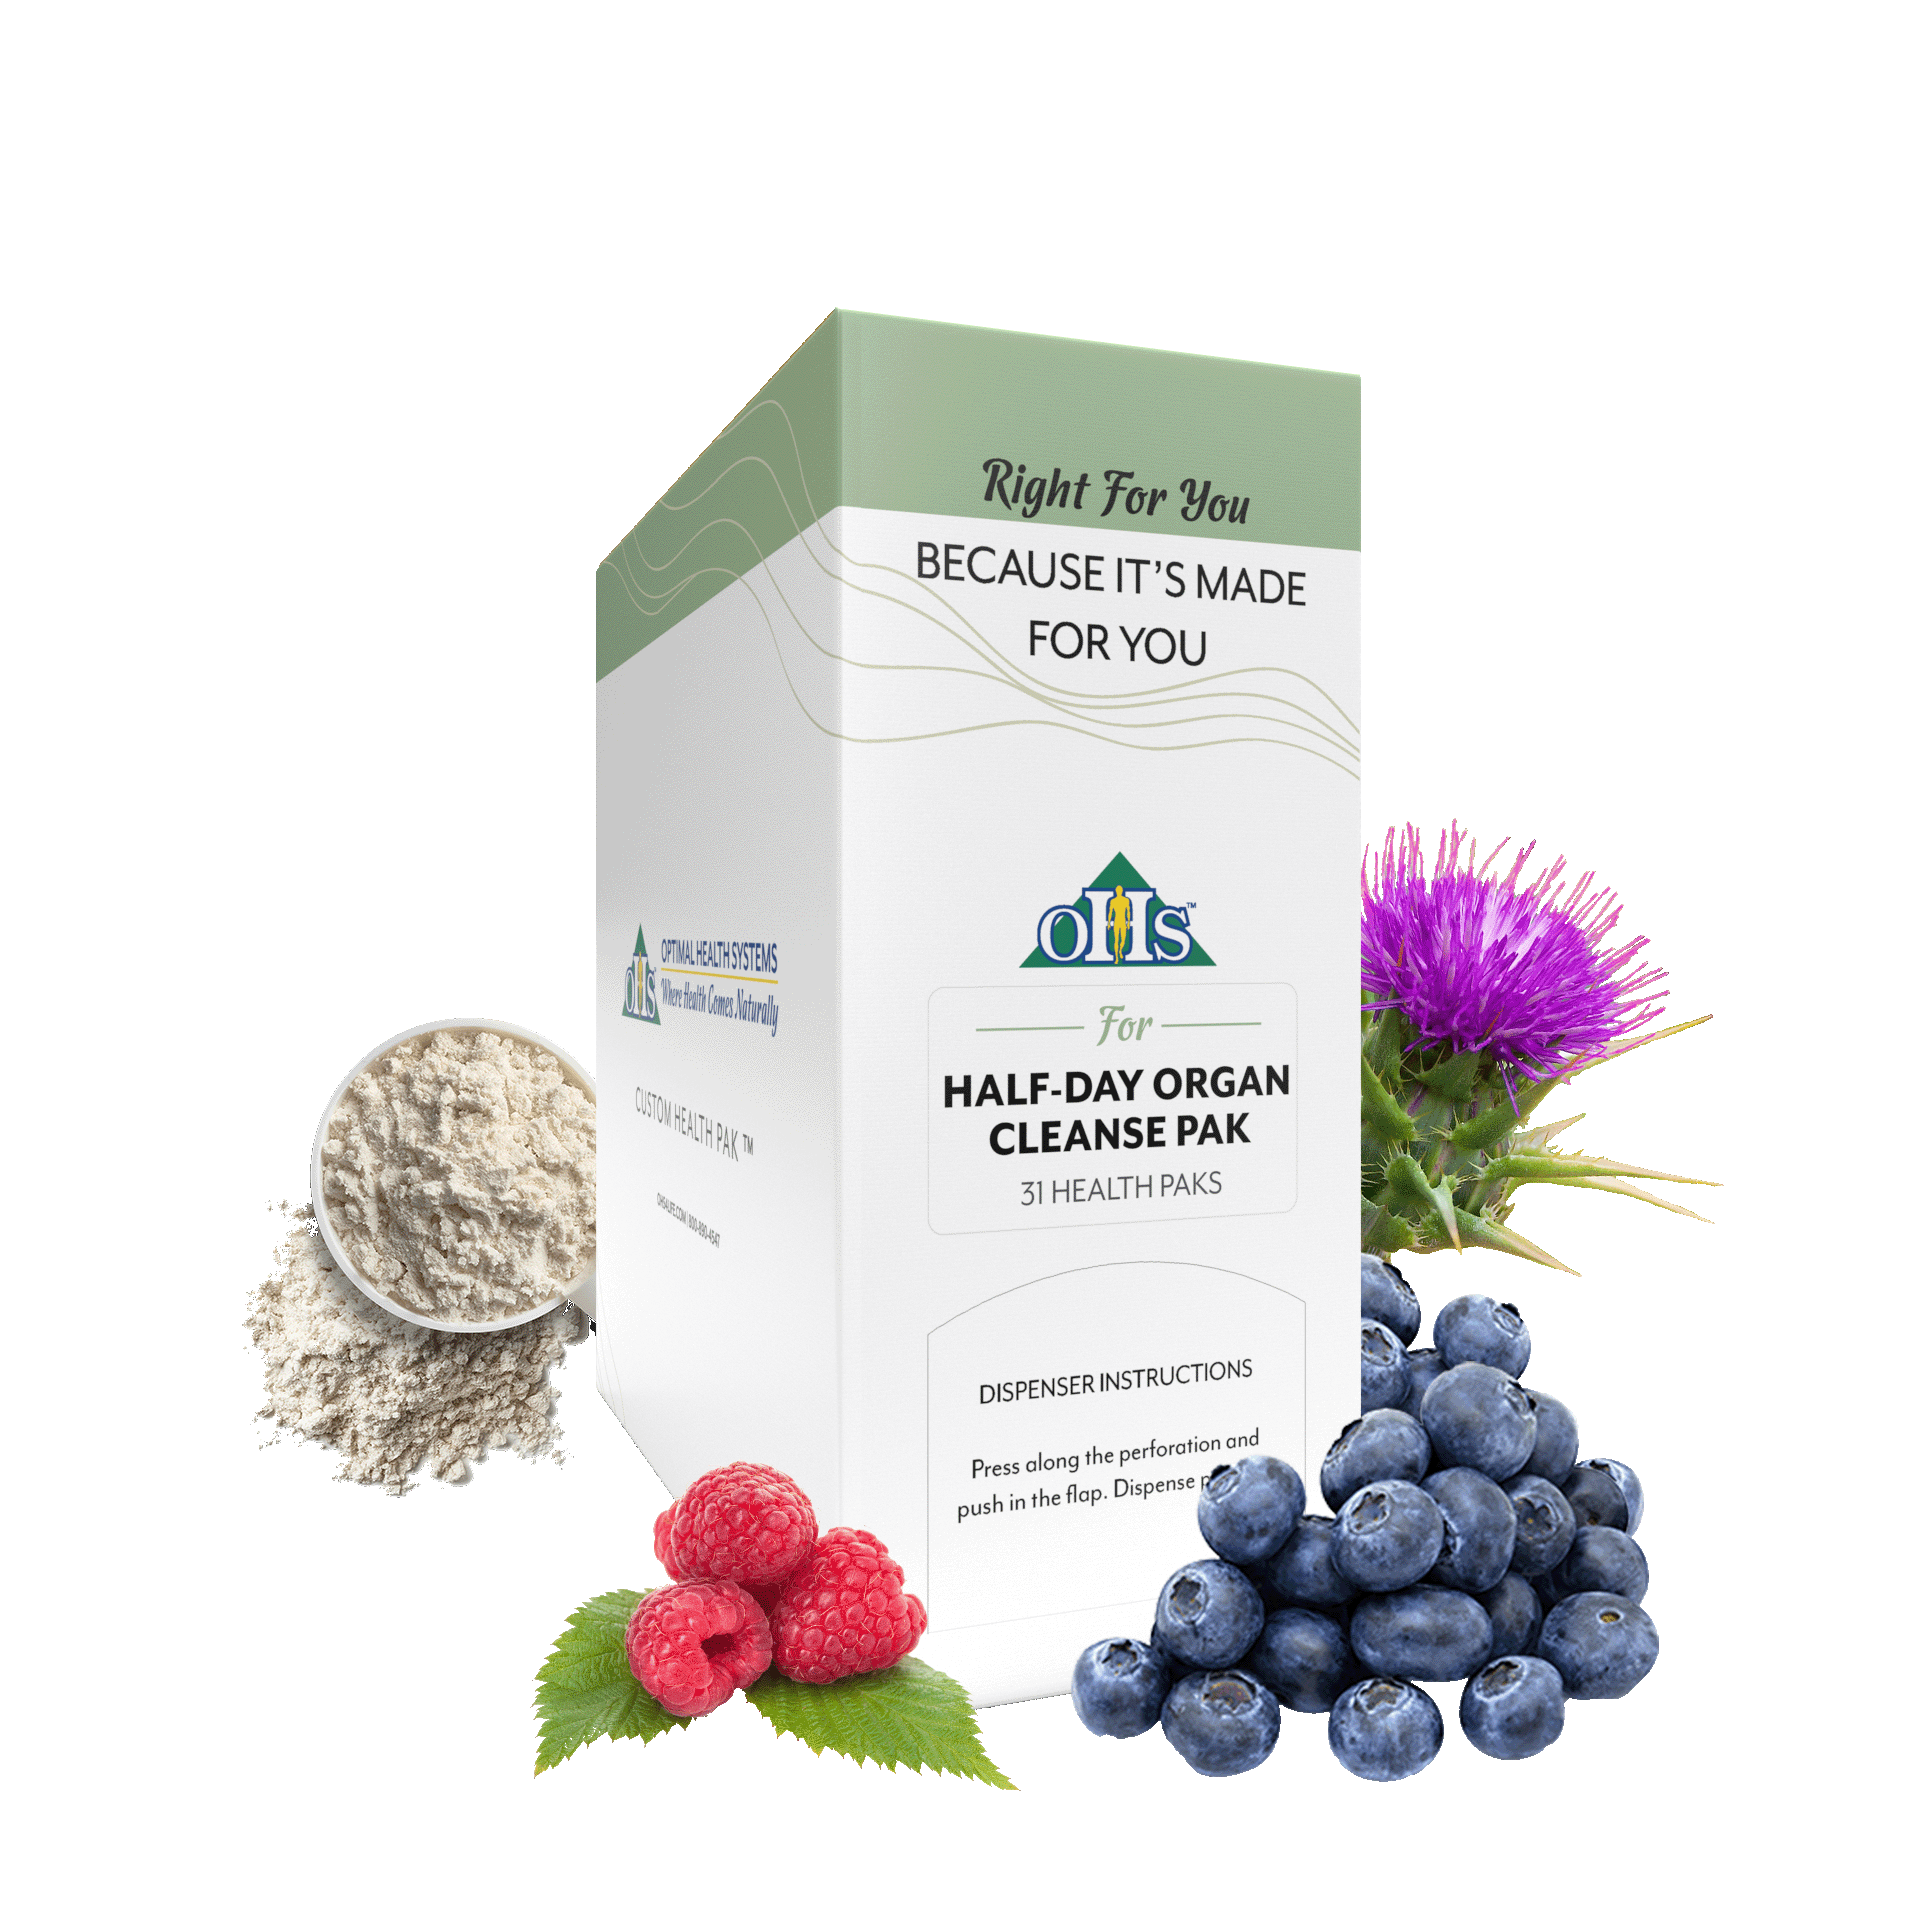 Image of an Optimal Half-Day Organ Cleanse Pak. Around the pak are raspberries, blueberries, milk thistle, and White powder.